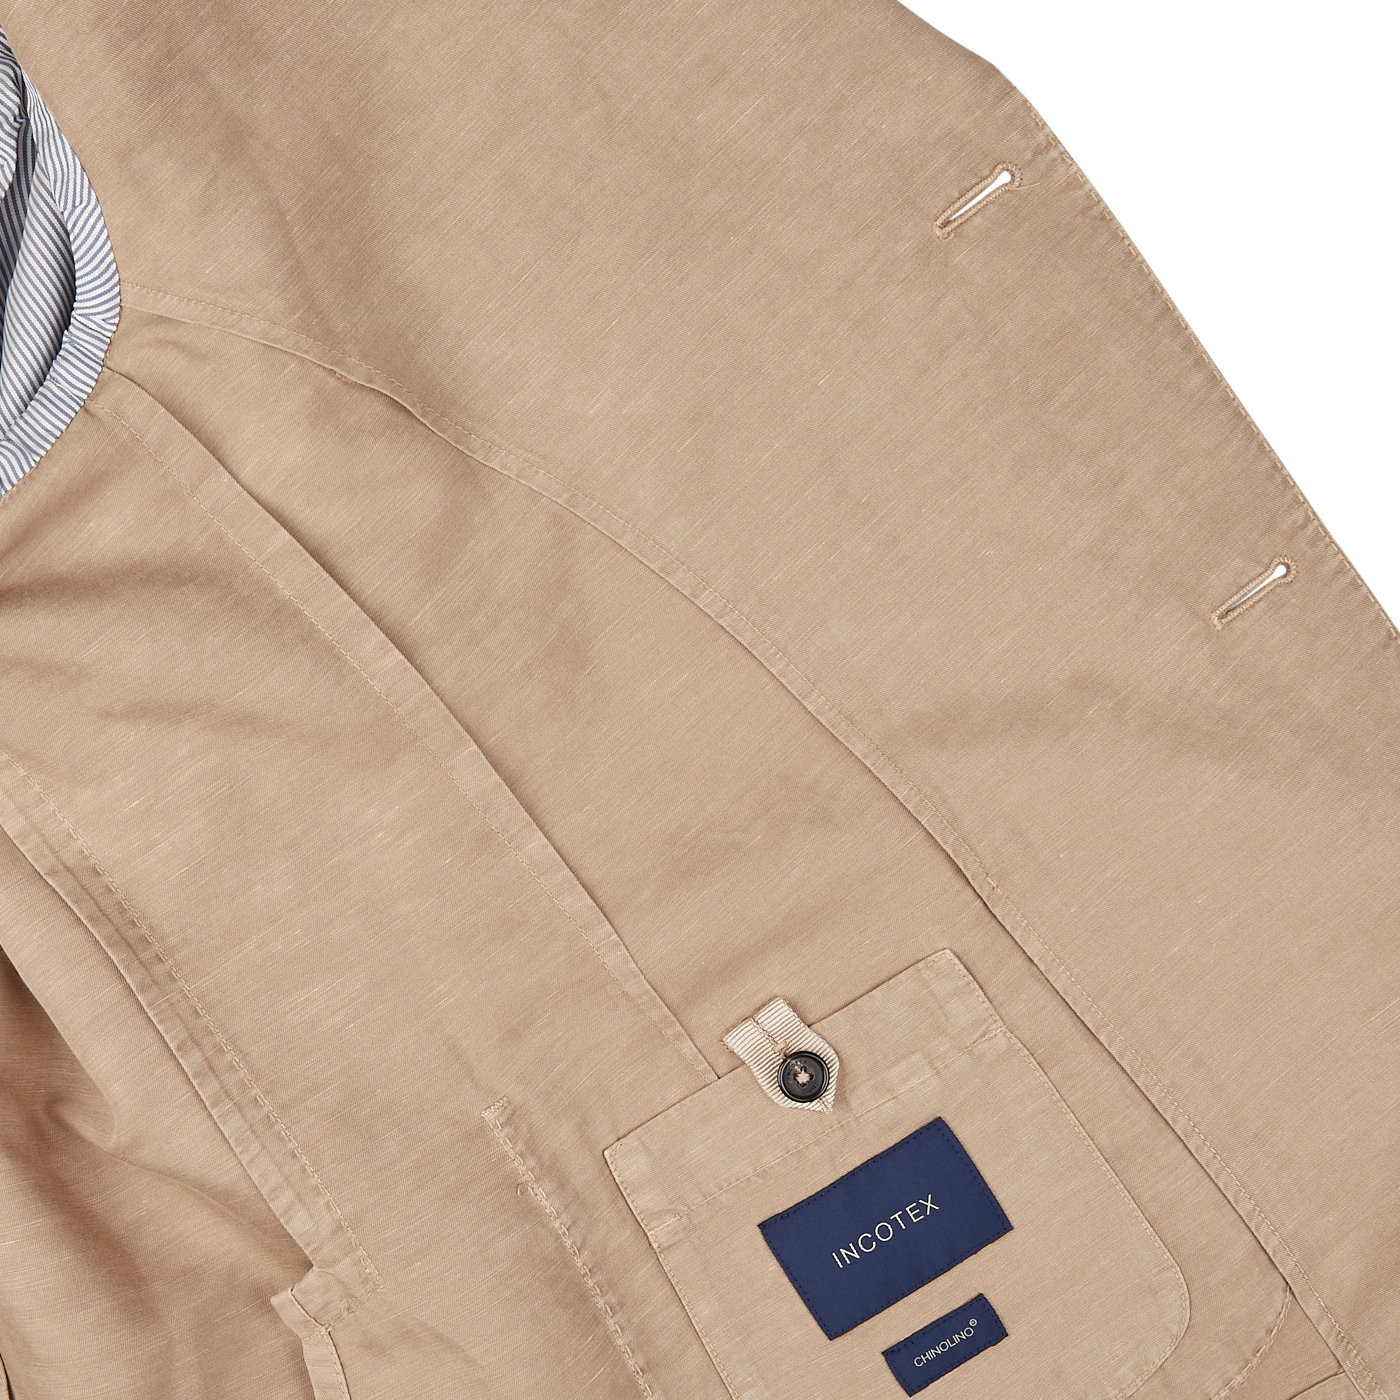 Men's Slowear light beige washed chinolino suit with a striped lining and a brand label on display.